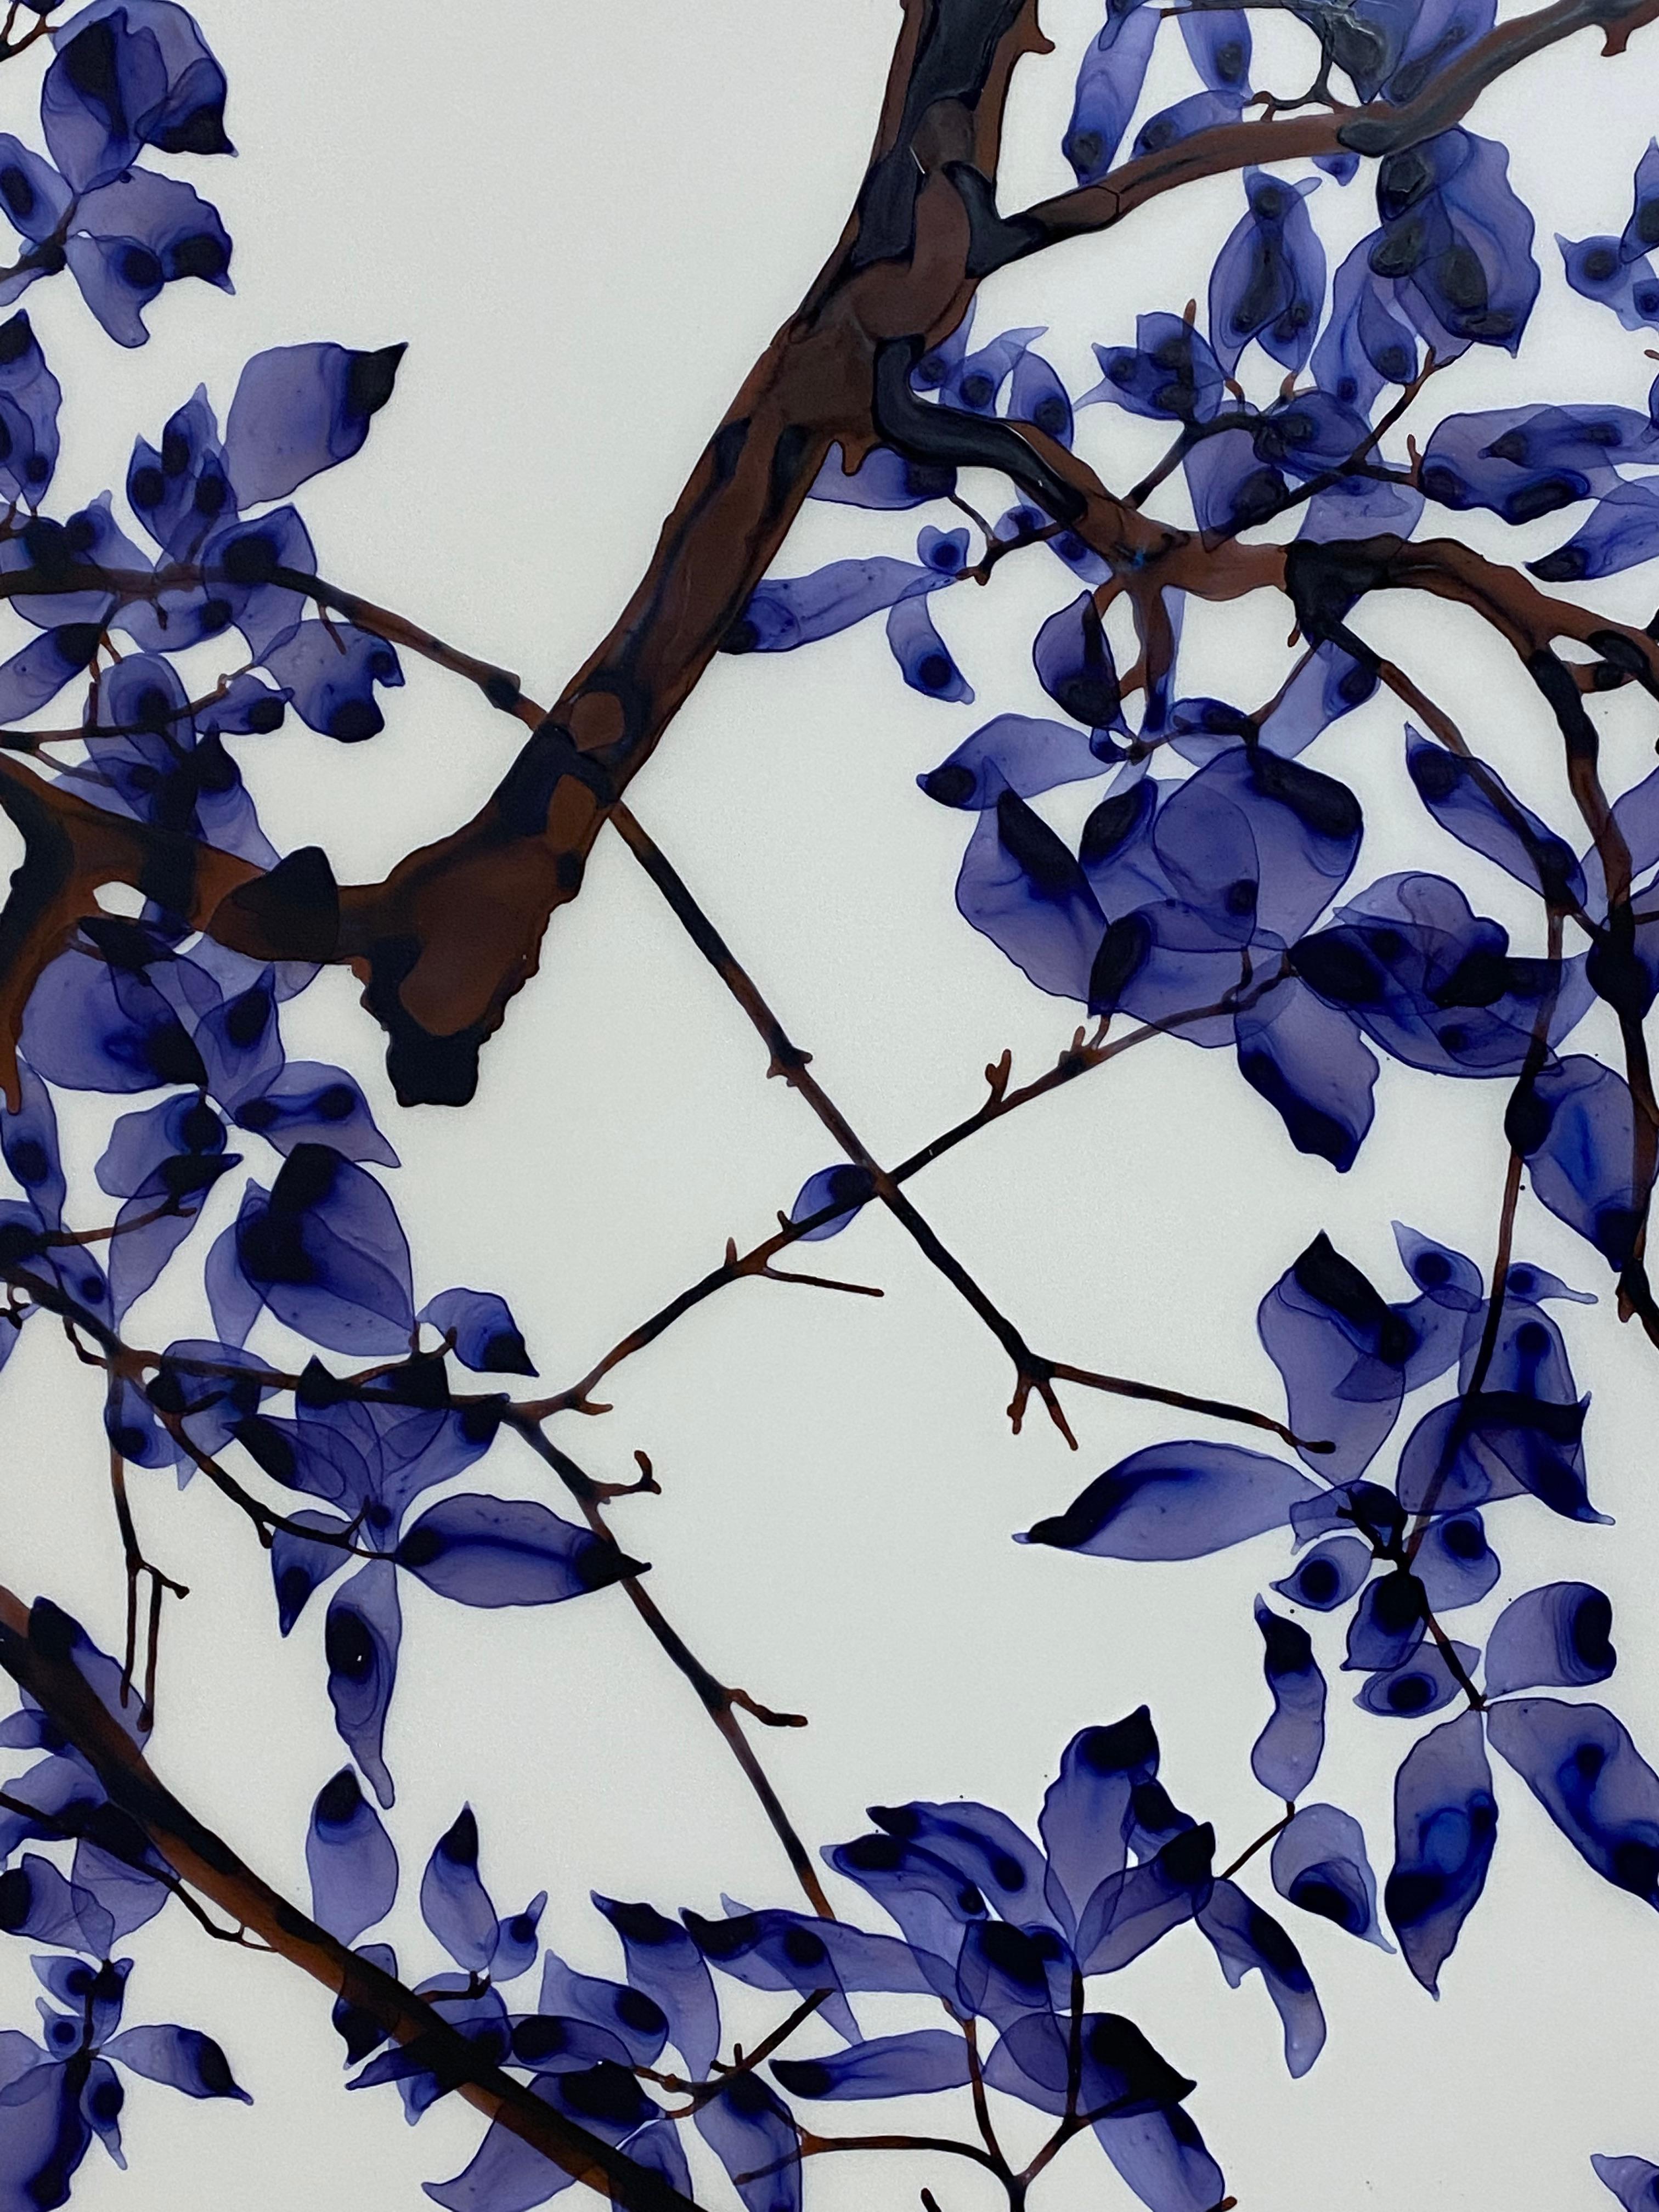 Layers of delicate foliage in shades of dark violet grace dark umber brown branches on the pristine white background of this painting in acrylic on Mylar.

Battenfield's paintings on Mylar require mounting and bracing prior to framing. Price shown